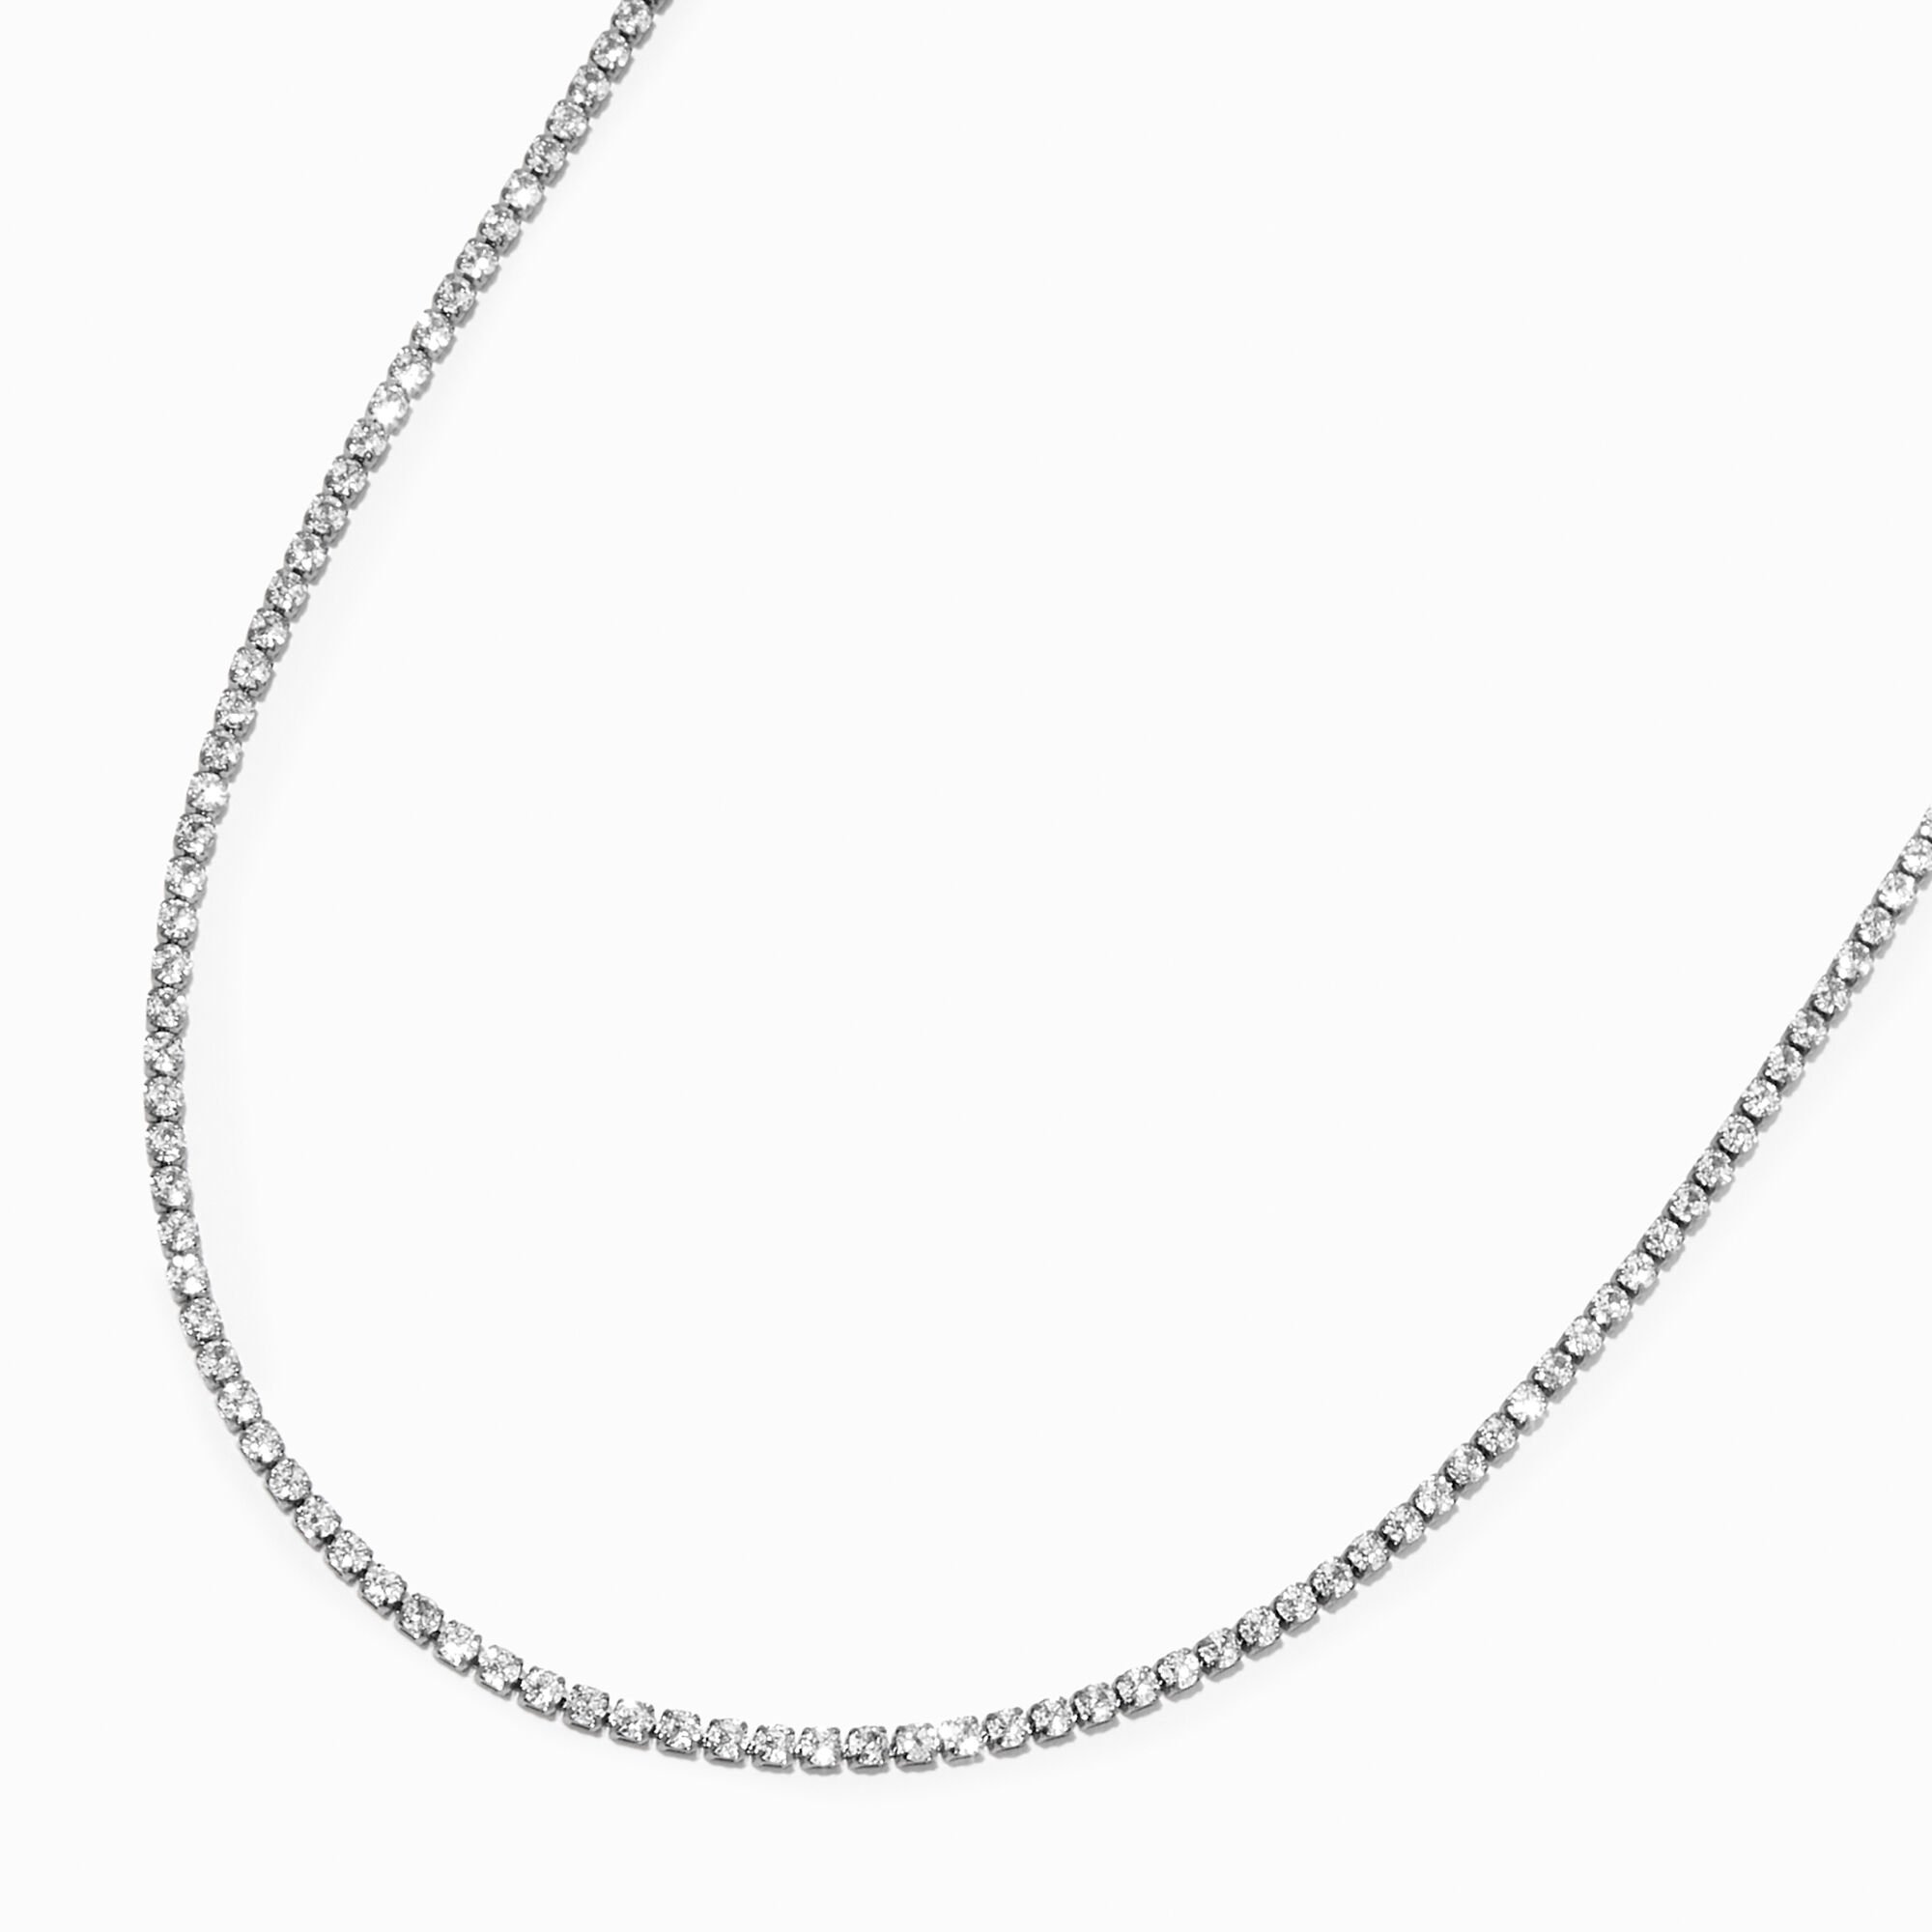 View Claires Hematite Cubic Zirconia Crystal Chain Tennis Necklace Silver information